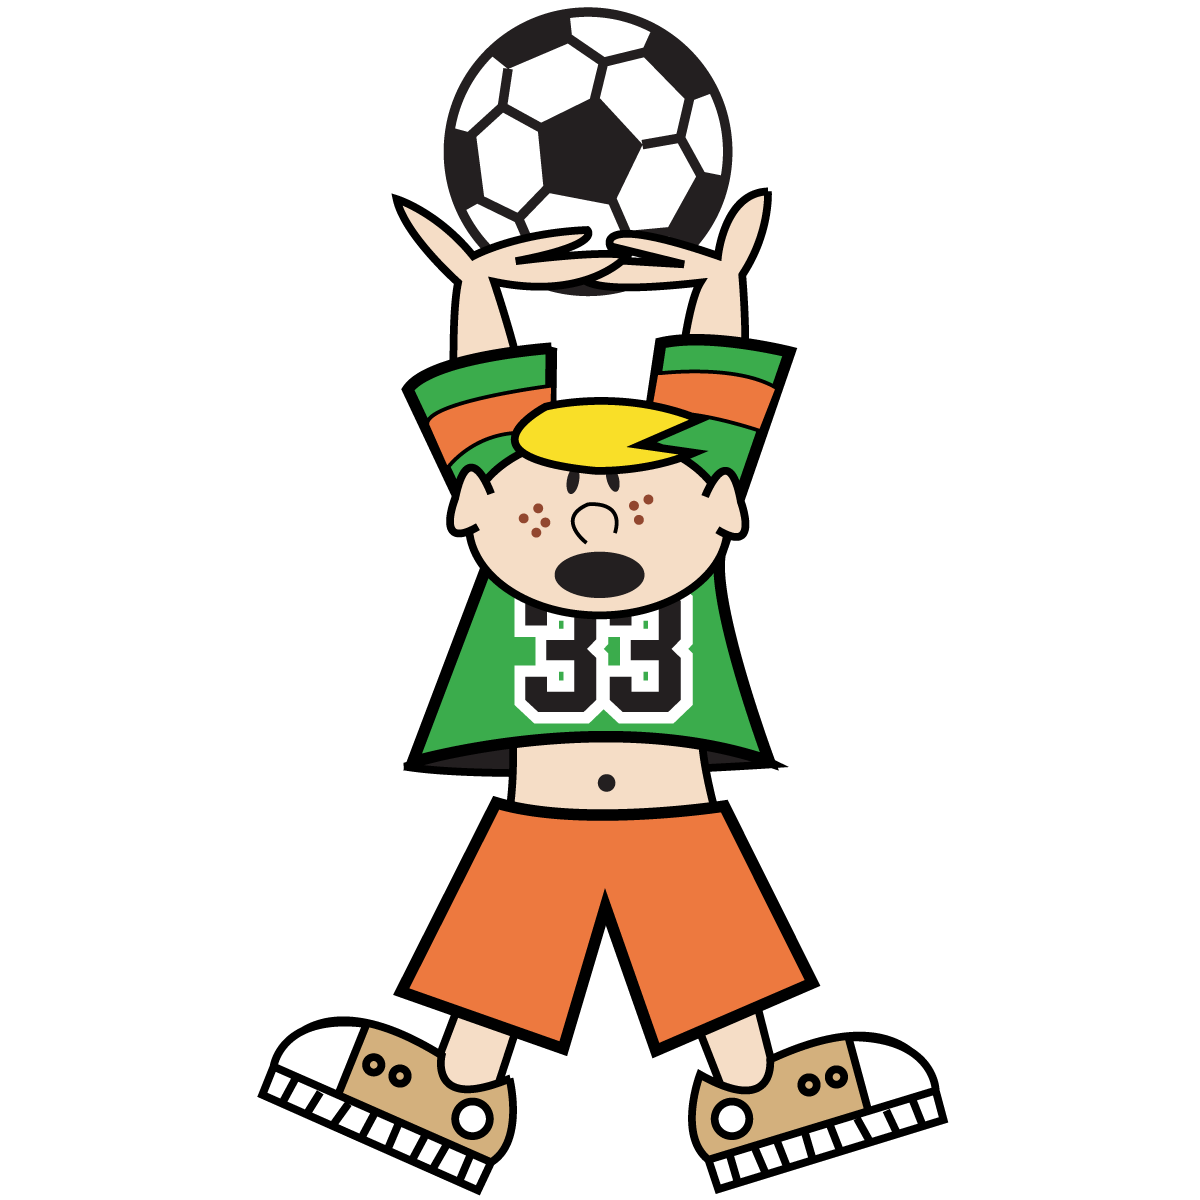 Kid Football Player Clipart   Clipart Panda   Free Clipart Images